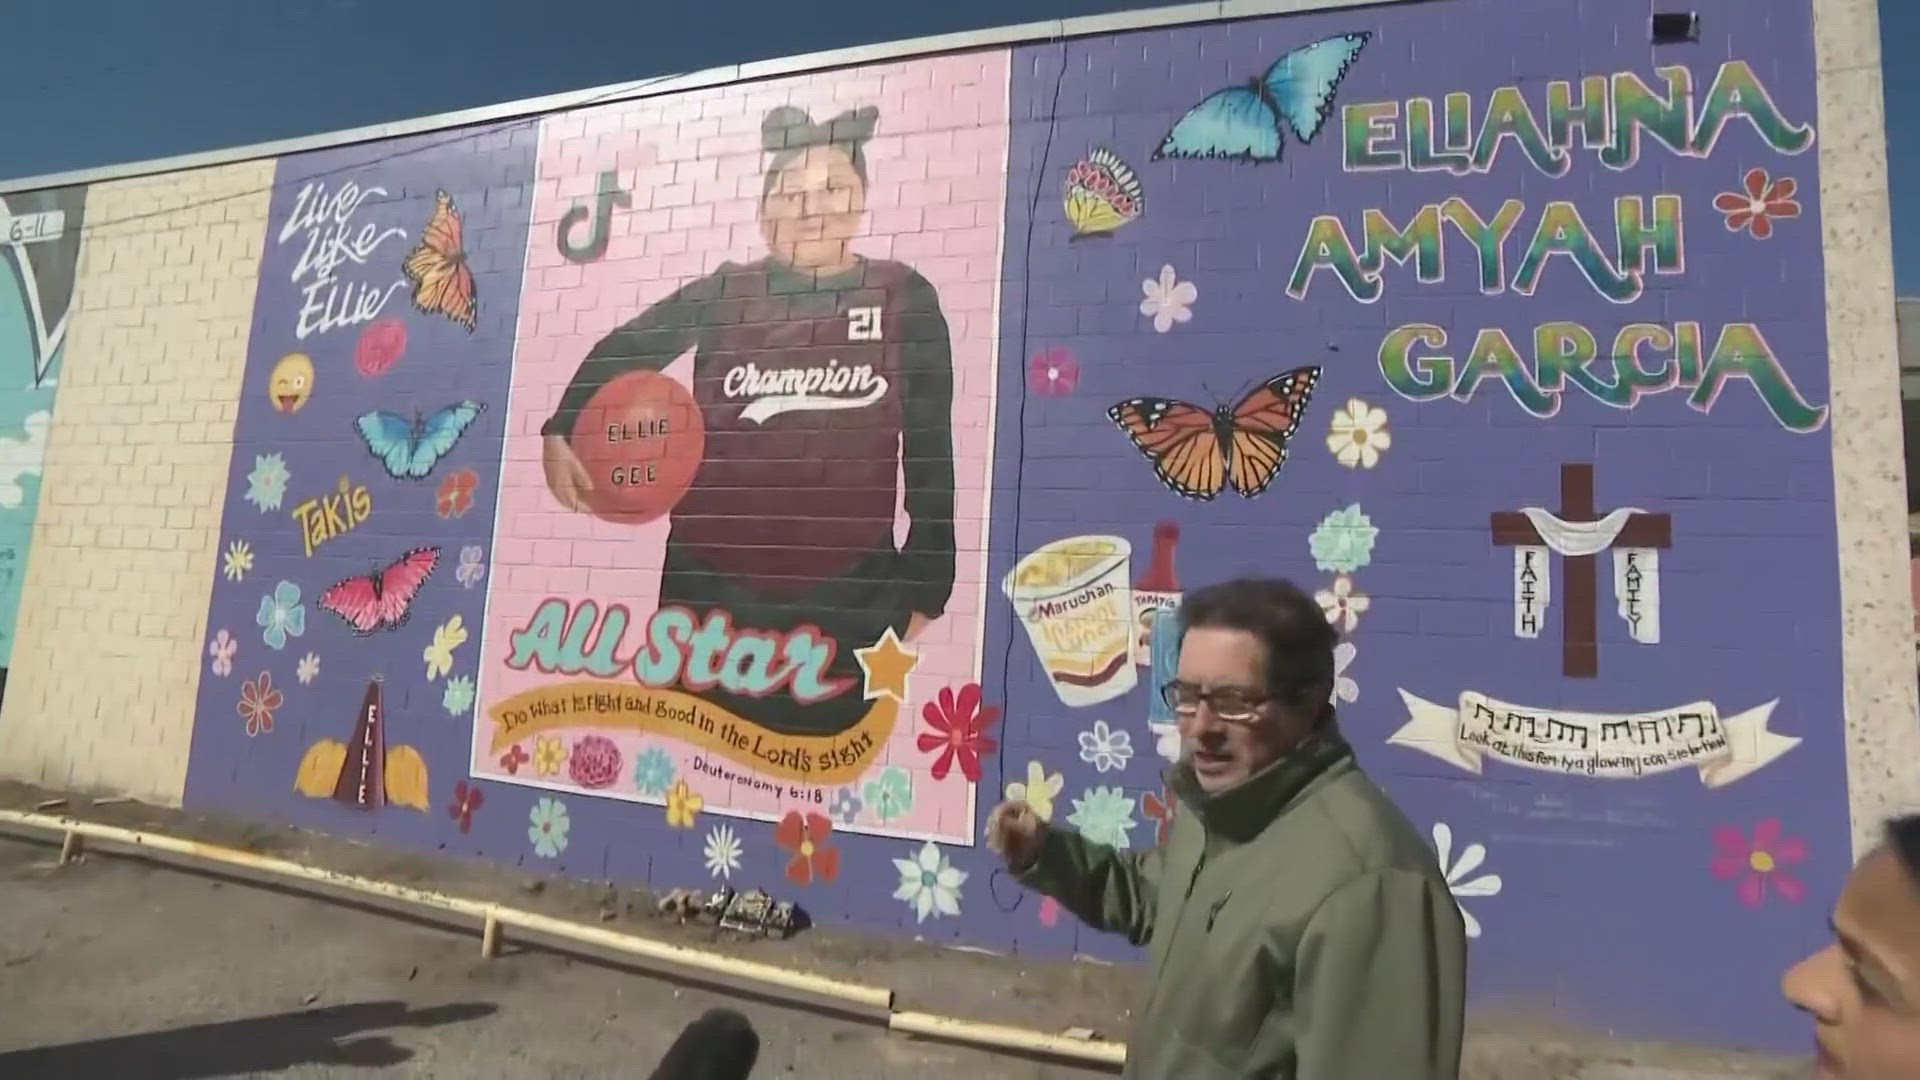 United States Attorney General Merrick Garland visited a mural in Uvalde honoring the victims of the Robb Elementary School shooting.